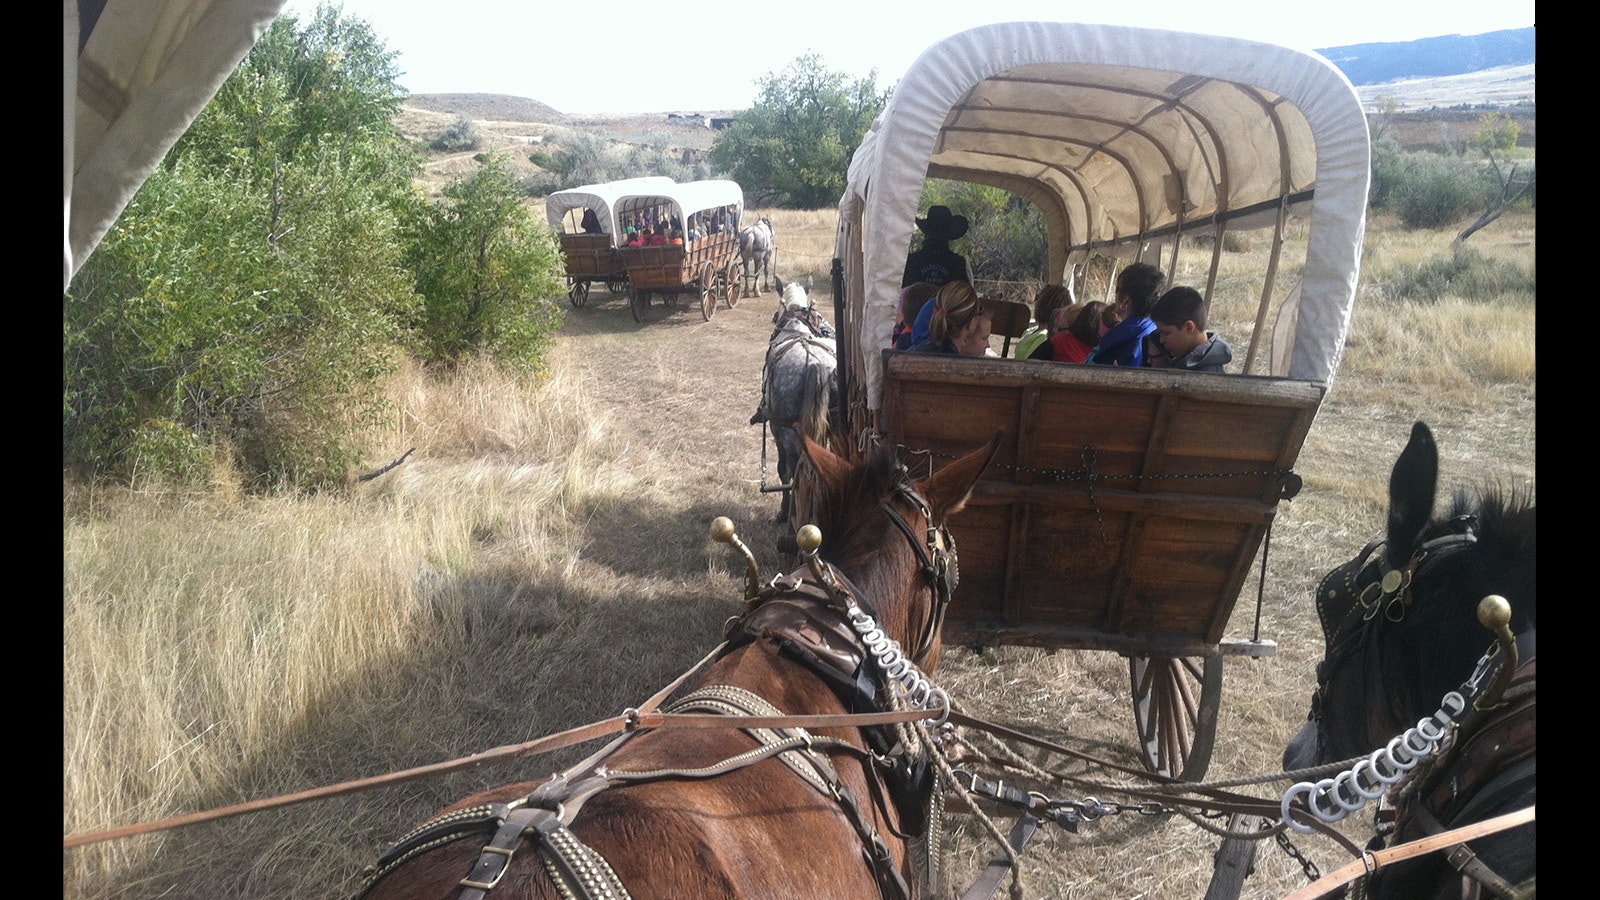 Historic Trails West in Casper leads a group of tourists through an authentic wagon ride along the Oregon Trail in Wyoming.